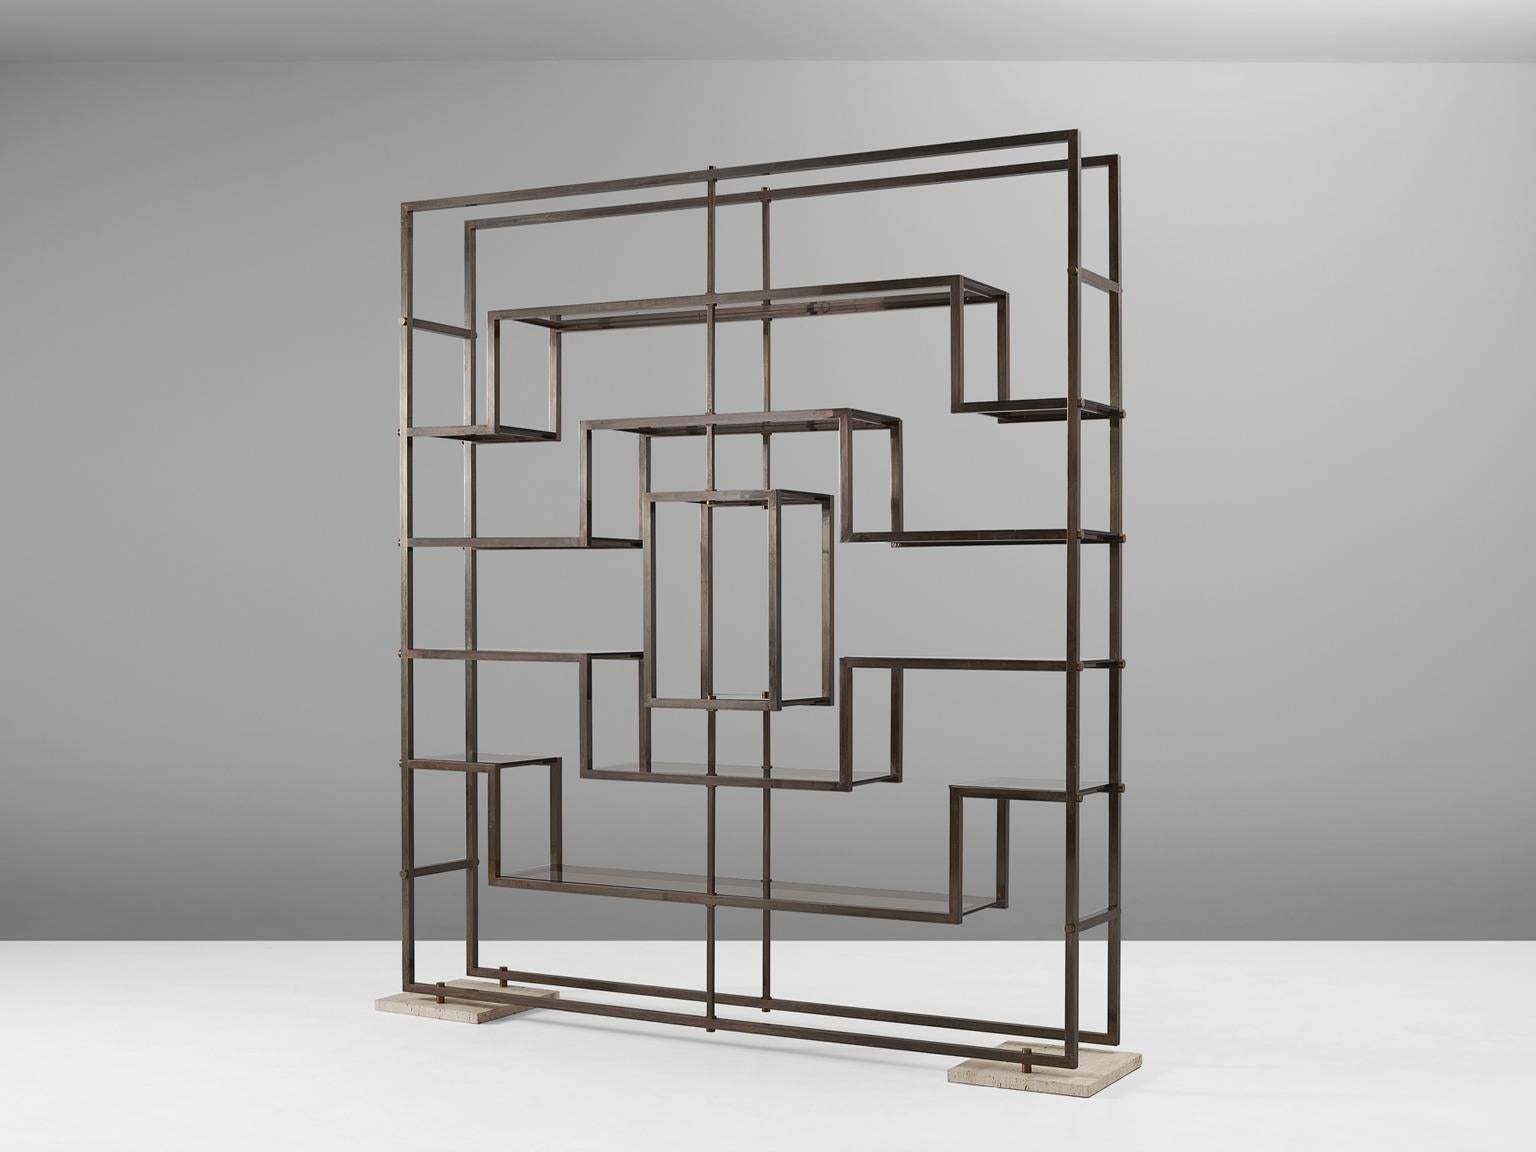 Etagere, in brass and glass, by Romeo Rega, Italy, 1970s.

Large wall console by Italian designer Romeo Rega. This graphical room divider shows beautiful symmetric lines. The horizontal lines are equipped with smoked glass shelves, which makes